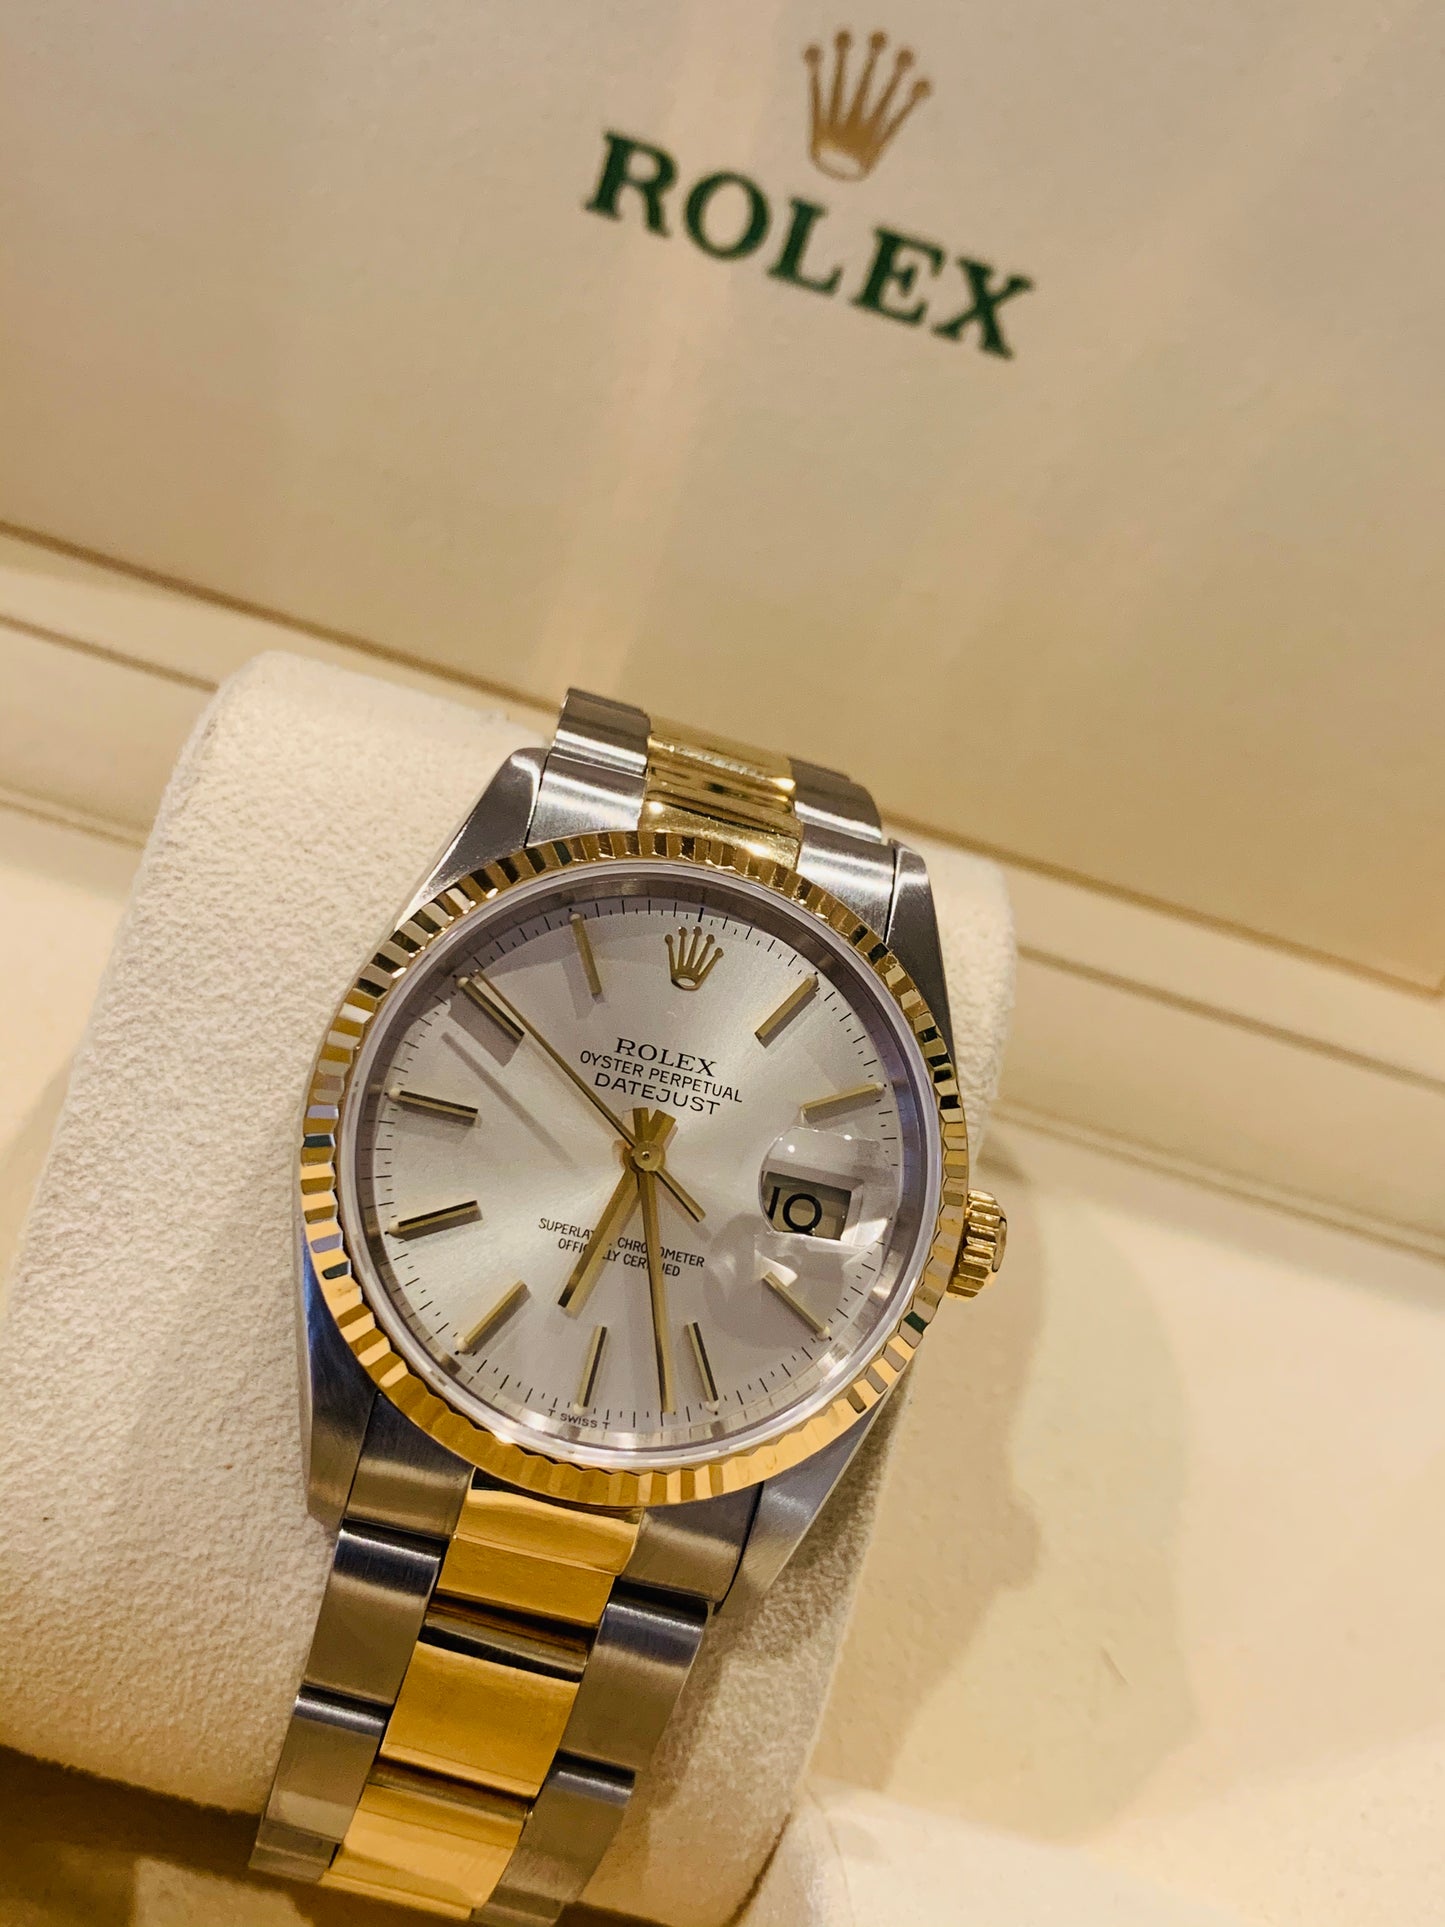 Rolex Datejust 18k Stainless Steel 16233 Champagne dial Oyster band